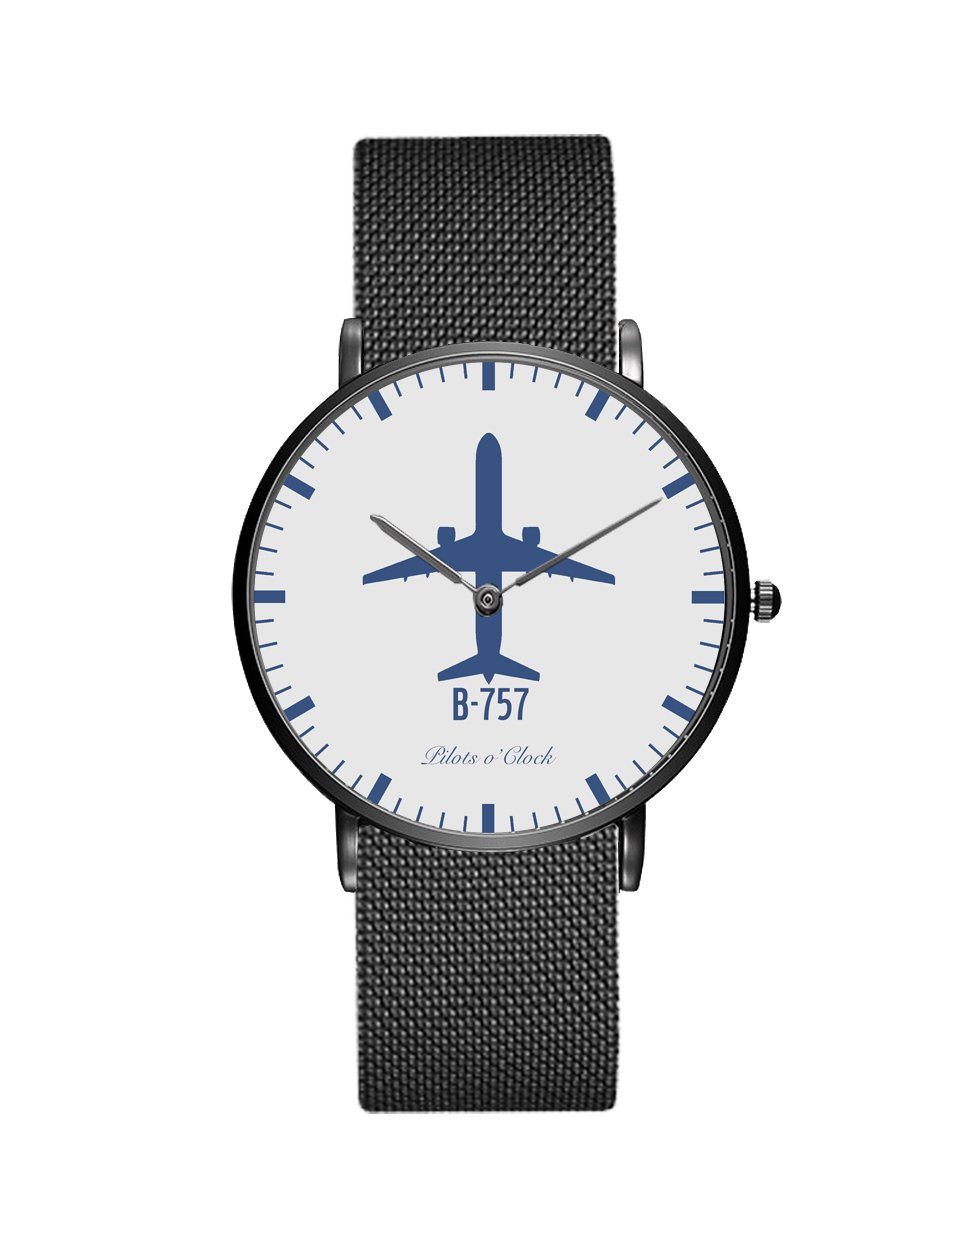 Boeing 757 Stainless Steel Strap Watches Pilot Eyes Store Black & Stainless Steel Strap 